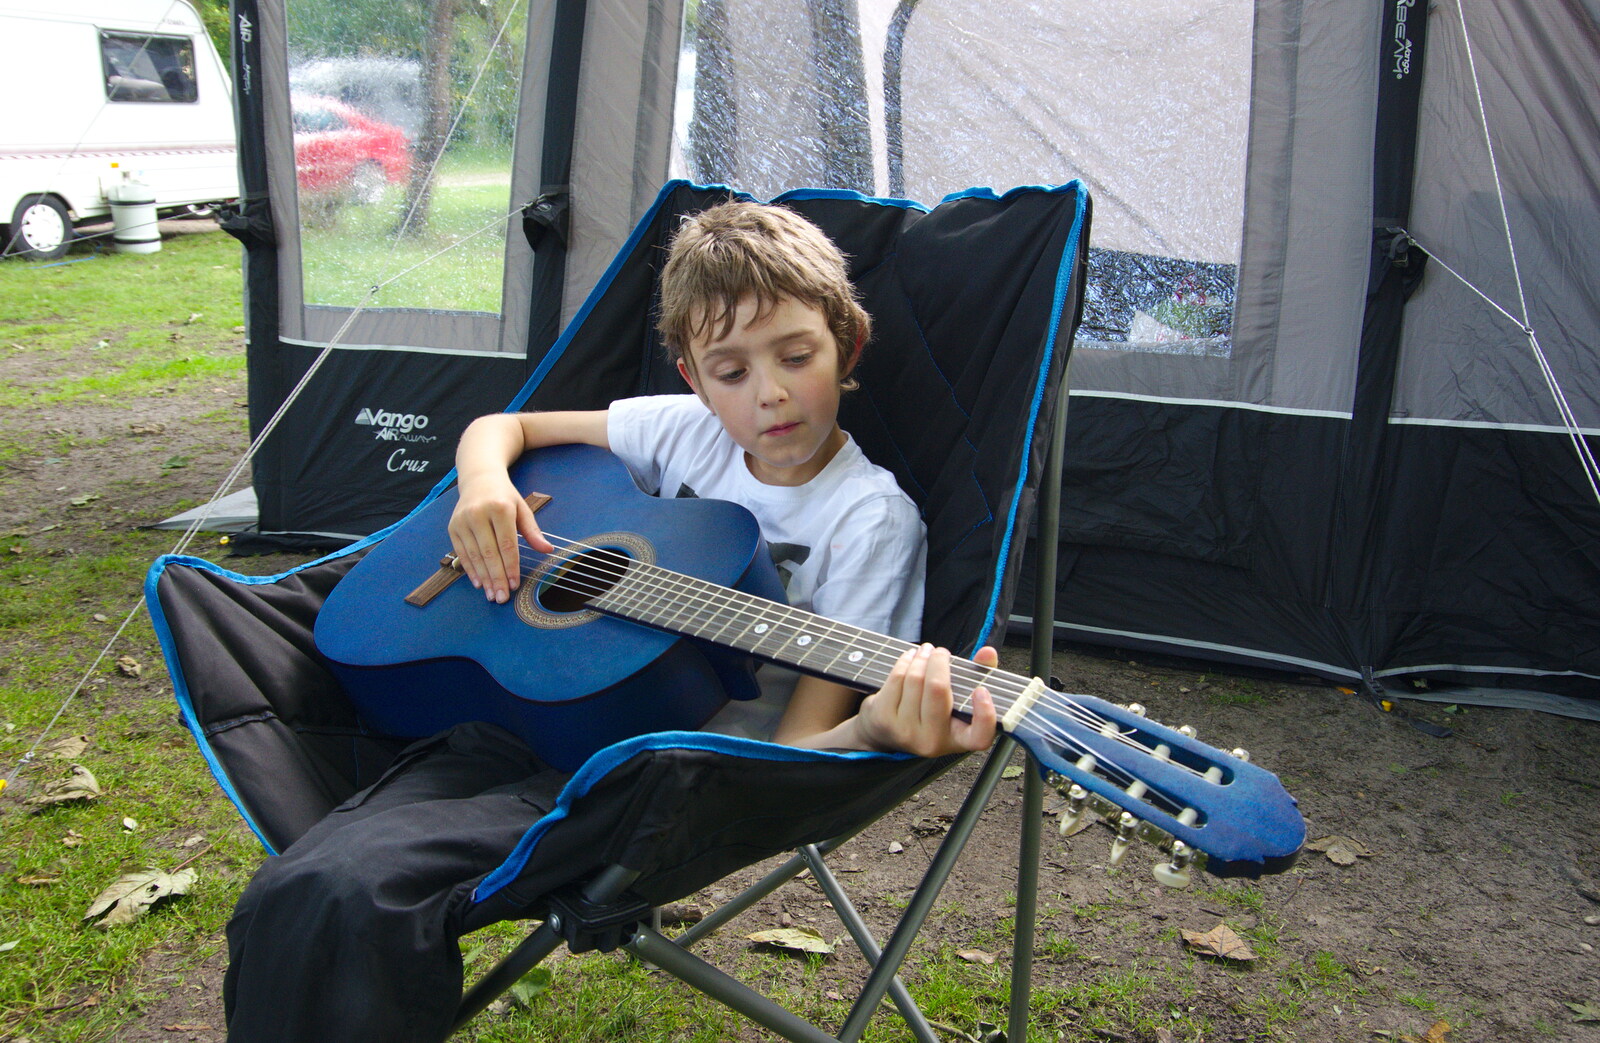 Fred plays guitar from Cliff House Camping, Dunwich, Suffolk - 15th June 2019